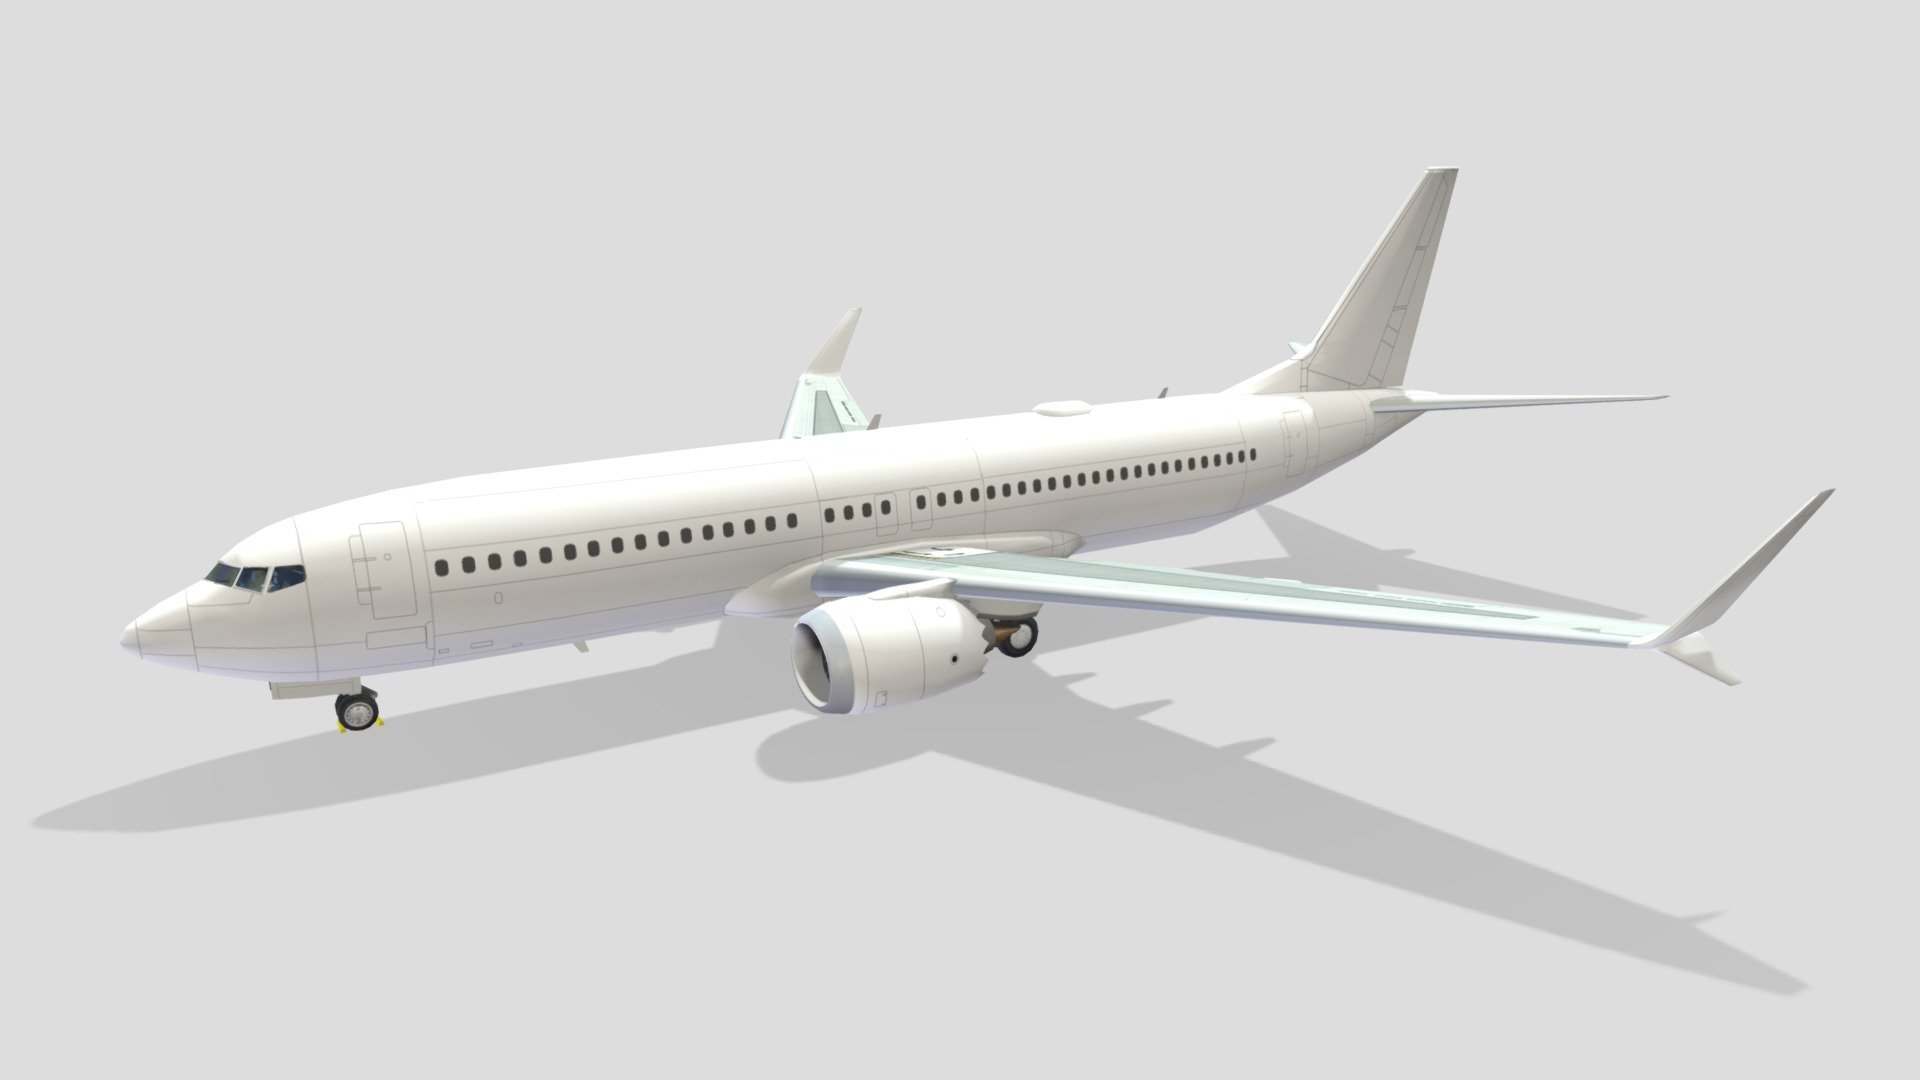 The 737 MAX is based on earlier 737 designs, with more efficient CFM International LEAP-1B engines, aerodynamic changes, including distinctive split-tip winglets, and airframe modifications. The 737 MAX series has been offered in four variants, offering 138 to 204 seats in typical two-class configuration, and a range of 3,300 to 3,850 nautical miles (6,110 to 7,130 km). The 737 MAX 7, MAX 8 (including the 200–seat MAX 200), and MAX 9 are intended to replace the 737-700, -800, and -900 respectively, and a further-stretched 737 MAX 10 is available. As of September 2022, the 737 MAX has 4,166 unfilled orders and 926 deliveries.

This is a  static, non rigged, Lowpoly mesh, blank layered 2048 psd template layered texture, for MSFS or XPlane Scenery Airport development , standard materials, not a detailed interior just enough to be seen as part of enviroment on airfields or airports

thanks for looking! dont forget to check my other models - Boeing 737 Max 8 Static Low Poly Blank - Buy Royalty Free 3D model by hangarcerouno 3d model